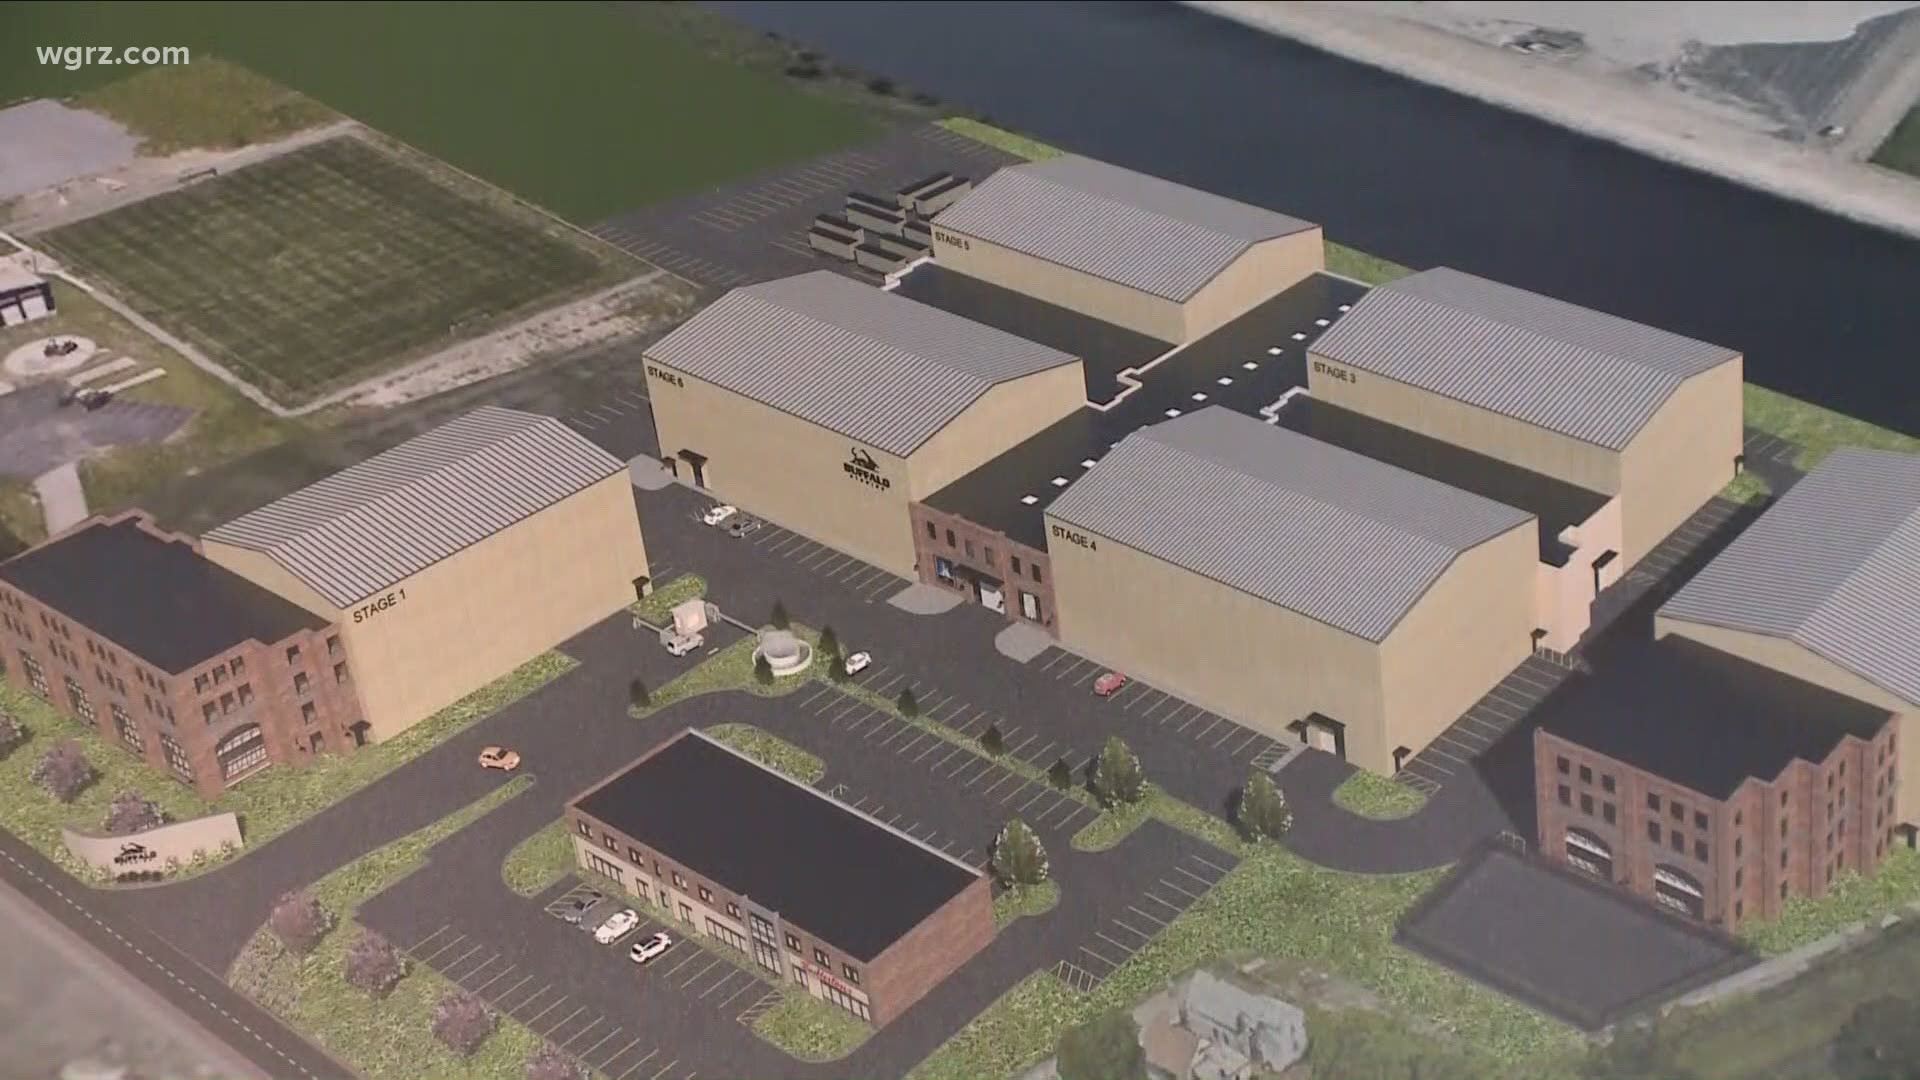 Film studio planned for South Buffalo